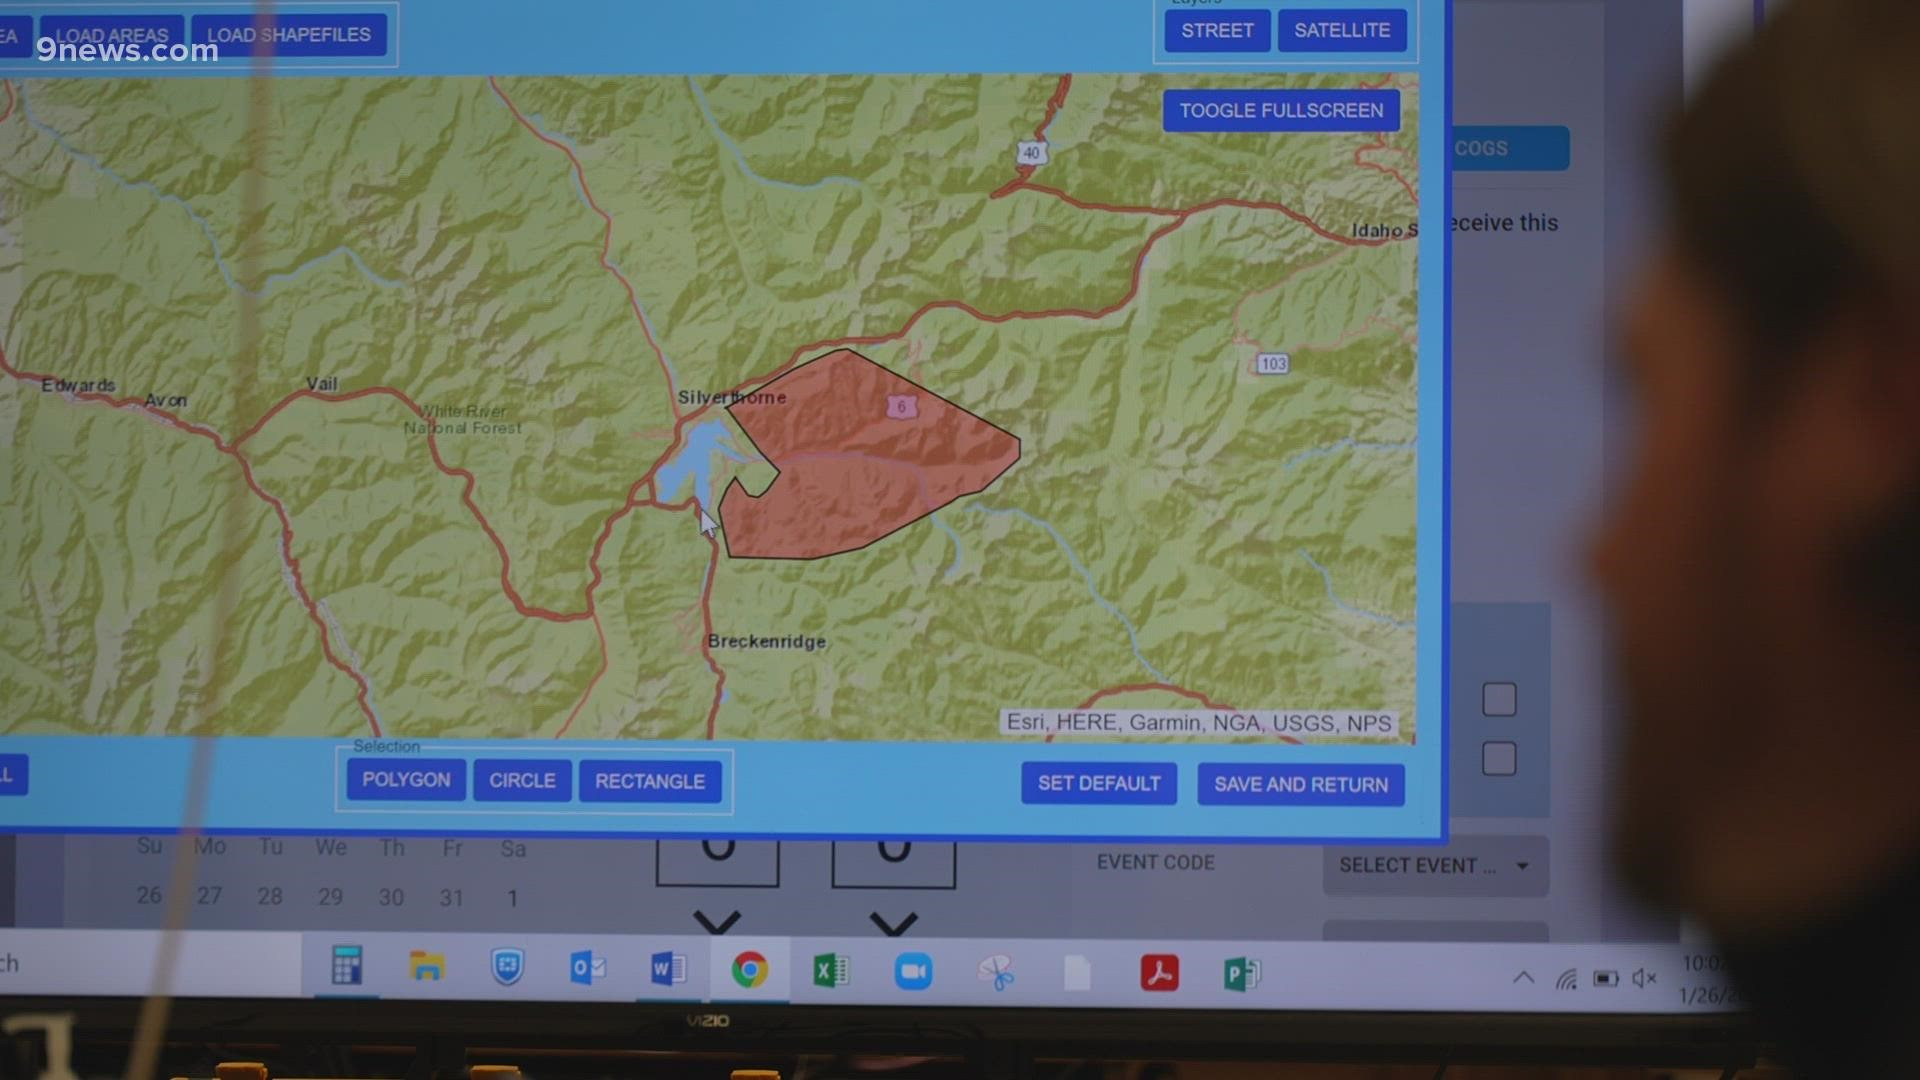 The Marshall Fire inspired questions about alerts. Summit County has used wireless emergency alerts, part of a federal alerting system, regularly for years.